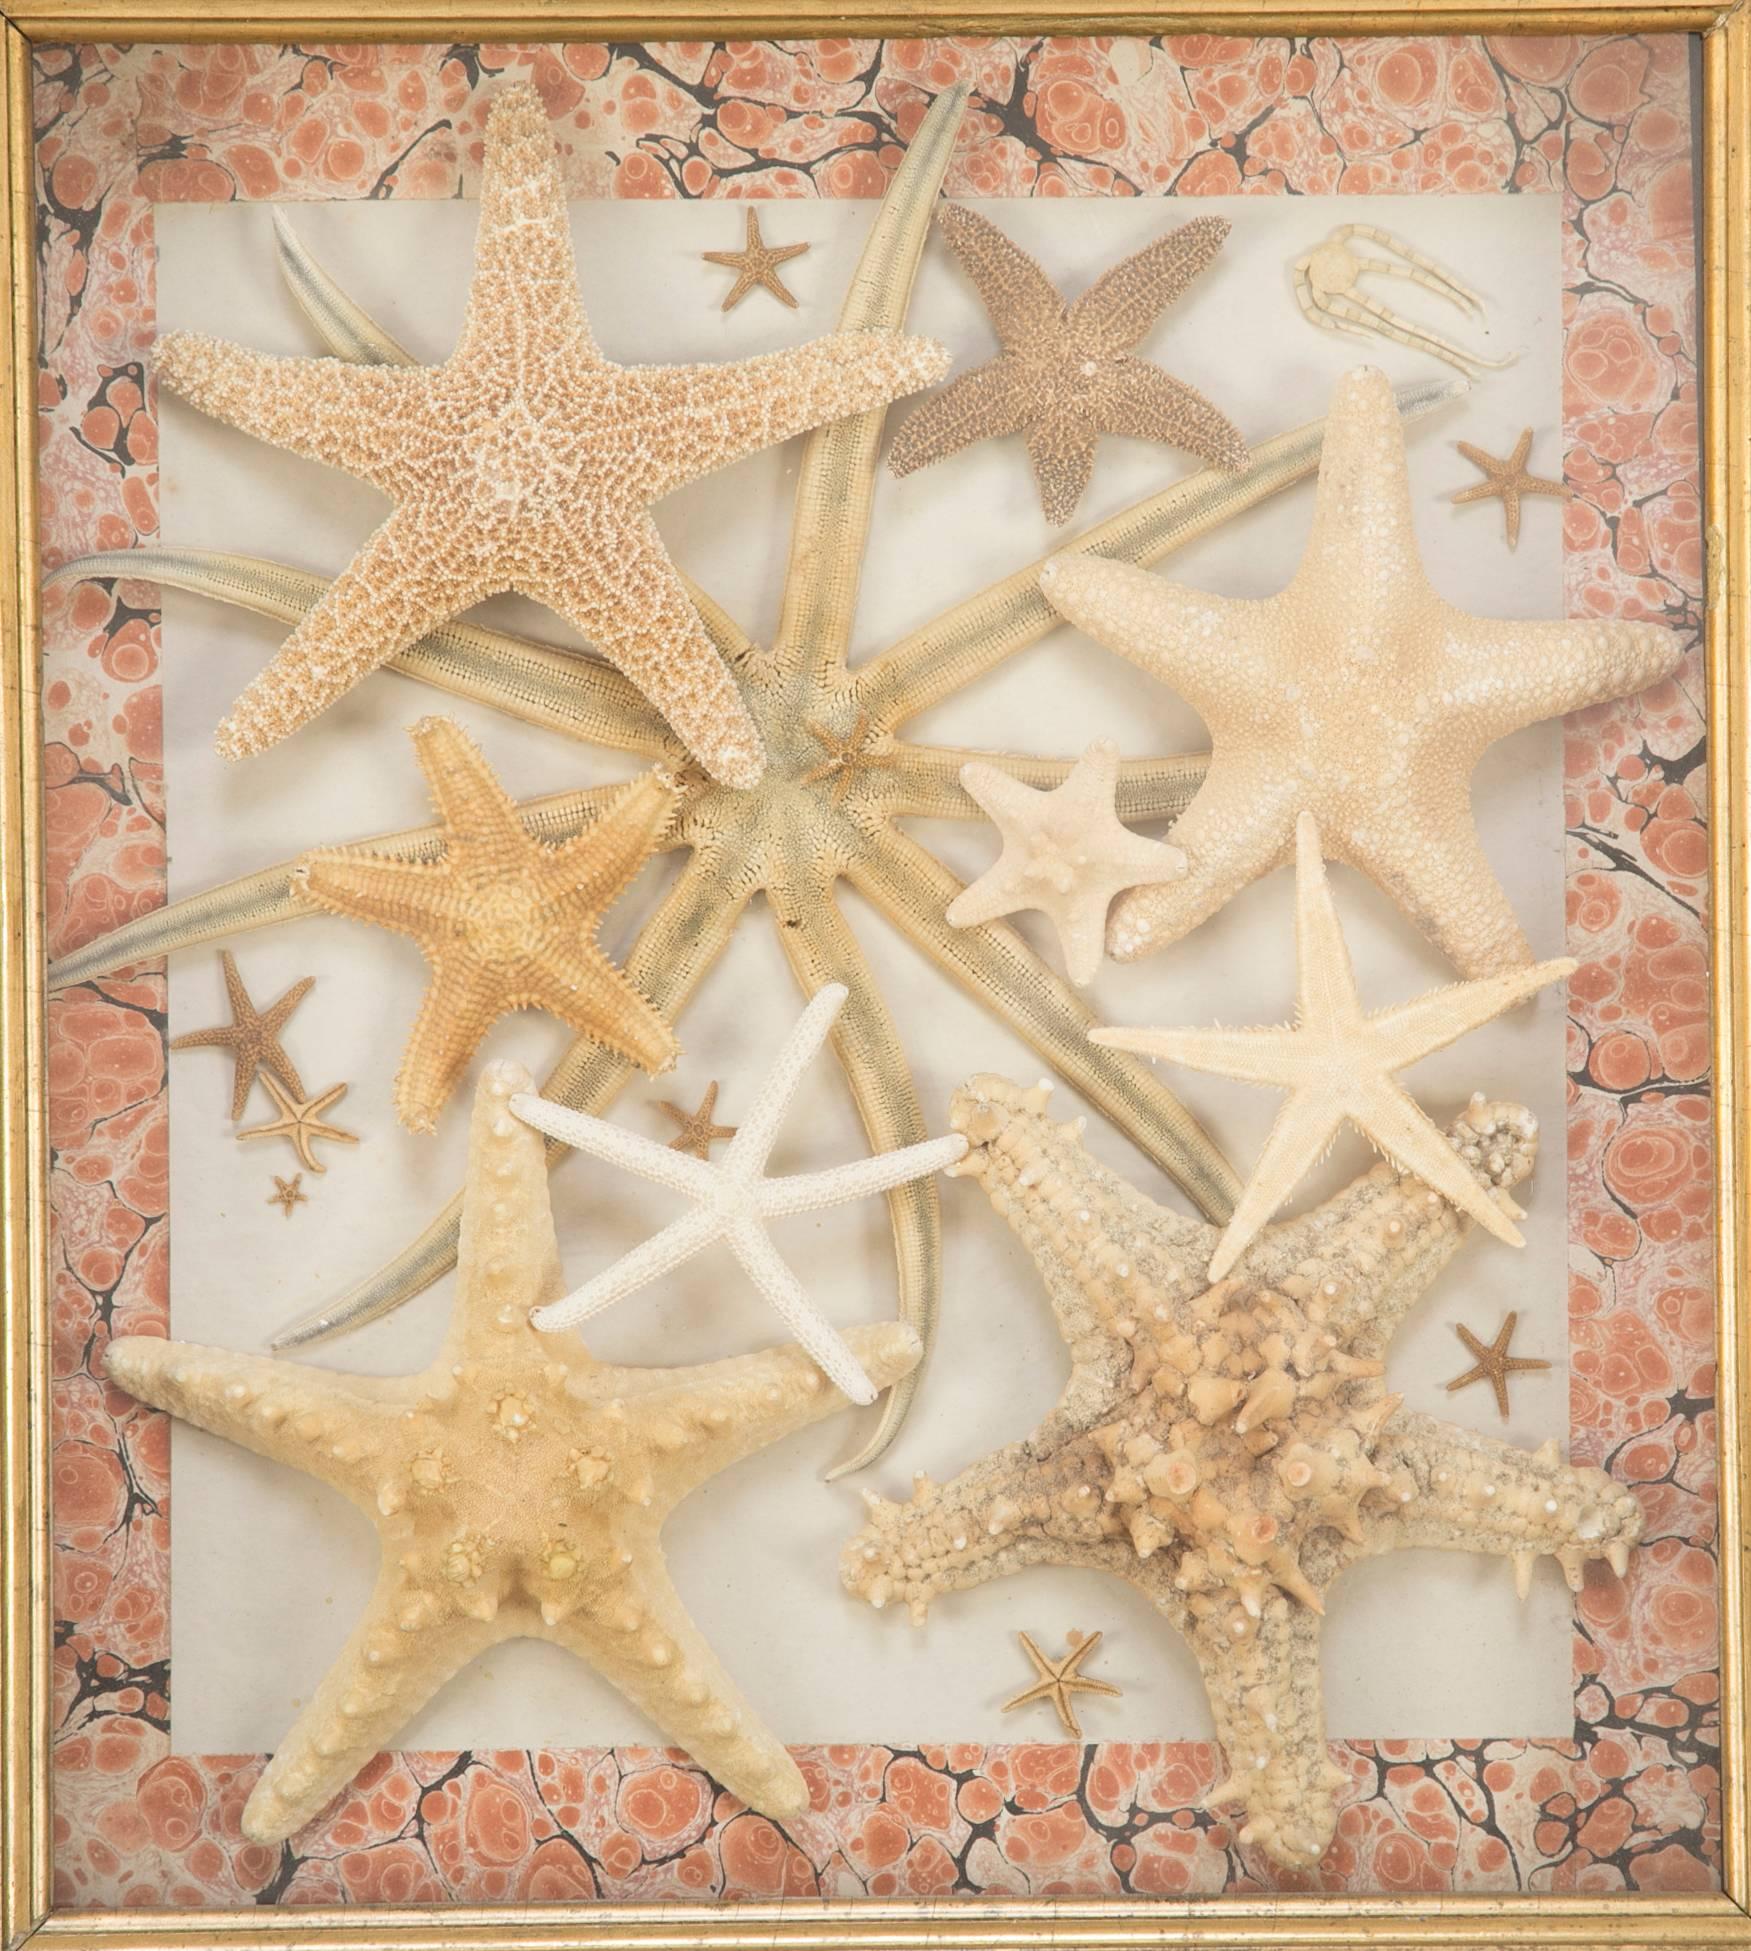 Charming vintage starfish collection mounted on faux marble bordered paper, in a mahogany frame with gilt wood inset molding. From a New England estate.